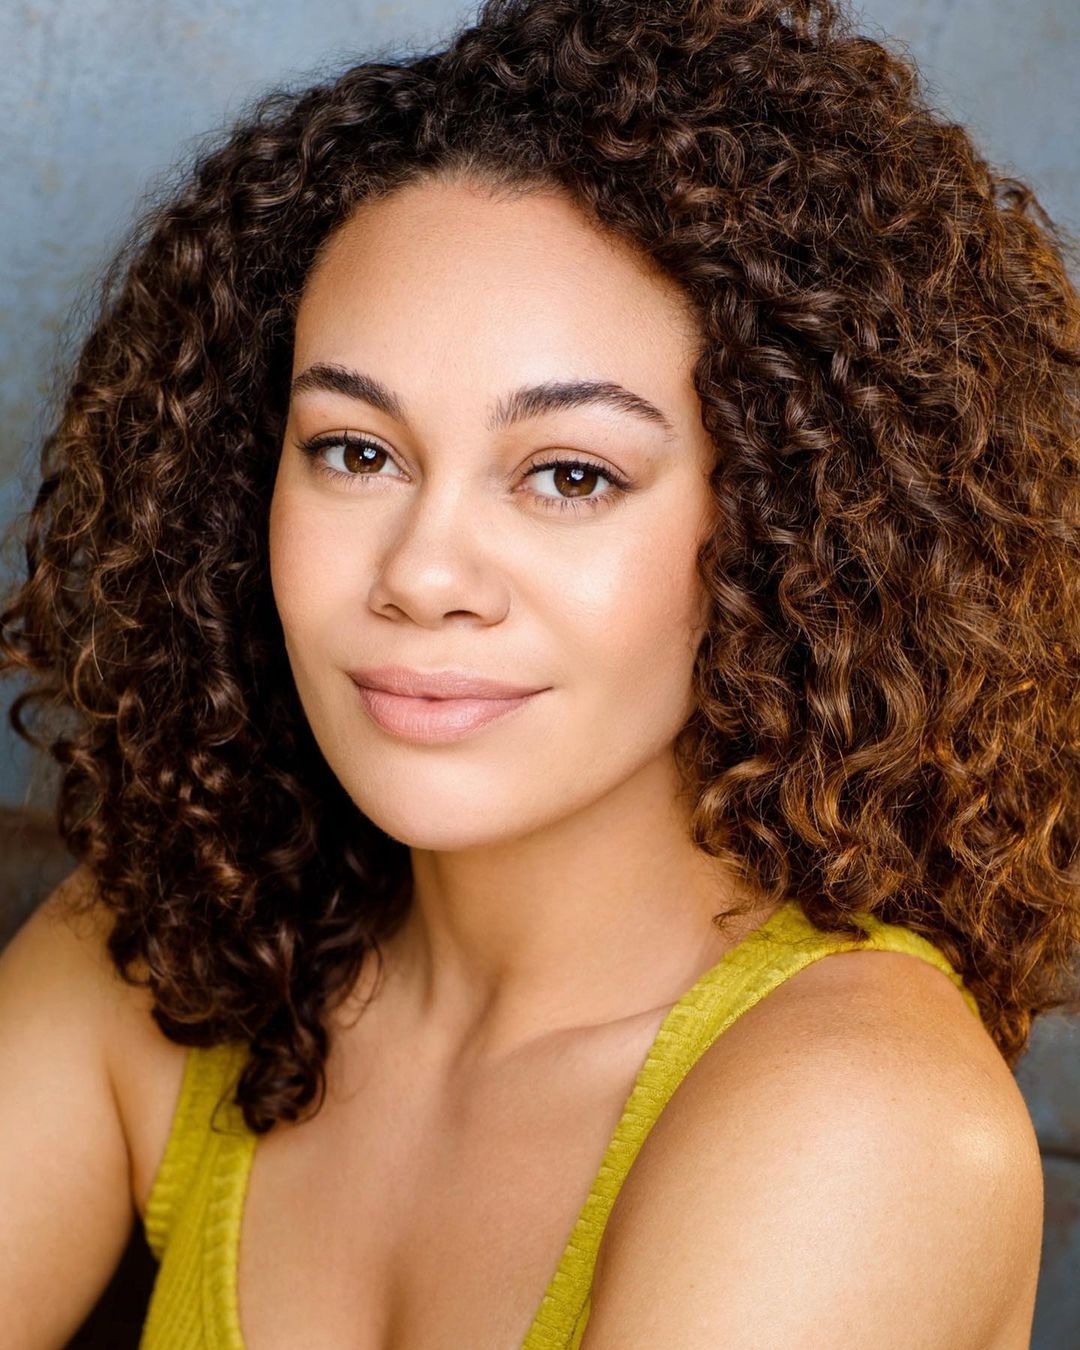 Micah Leonard (@micah_leonard) is an actor and dancer from San Diego, CA. She began her career dancing for artists such as Austin Millz, Lil Naz X and Beyonce and has also appeared in multiple national campaigns including AVON’s “Boss Life.” Micah...